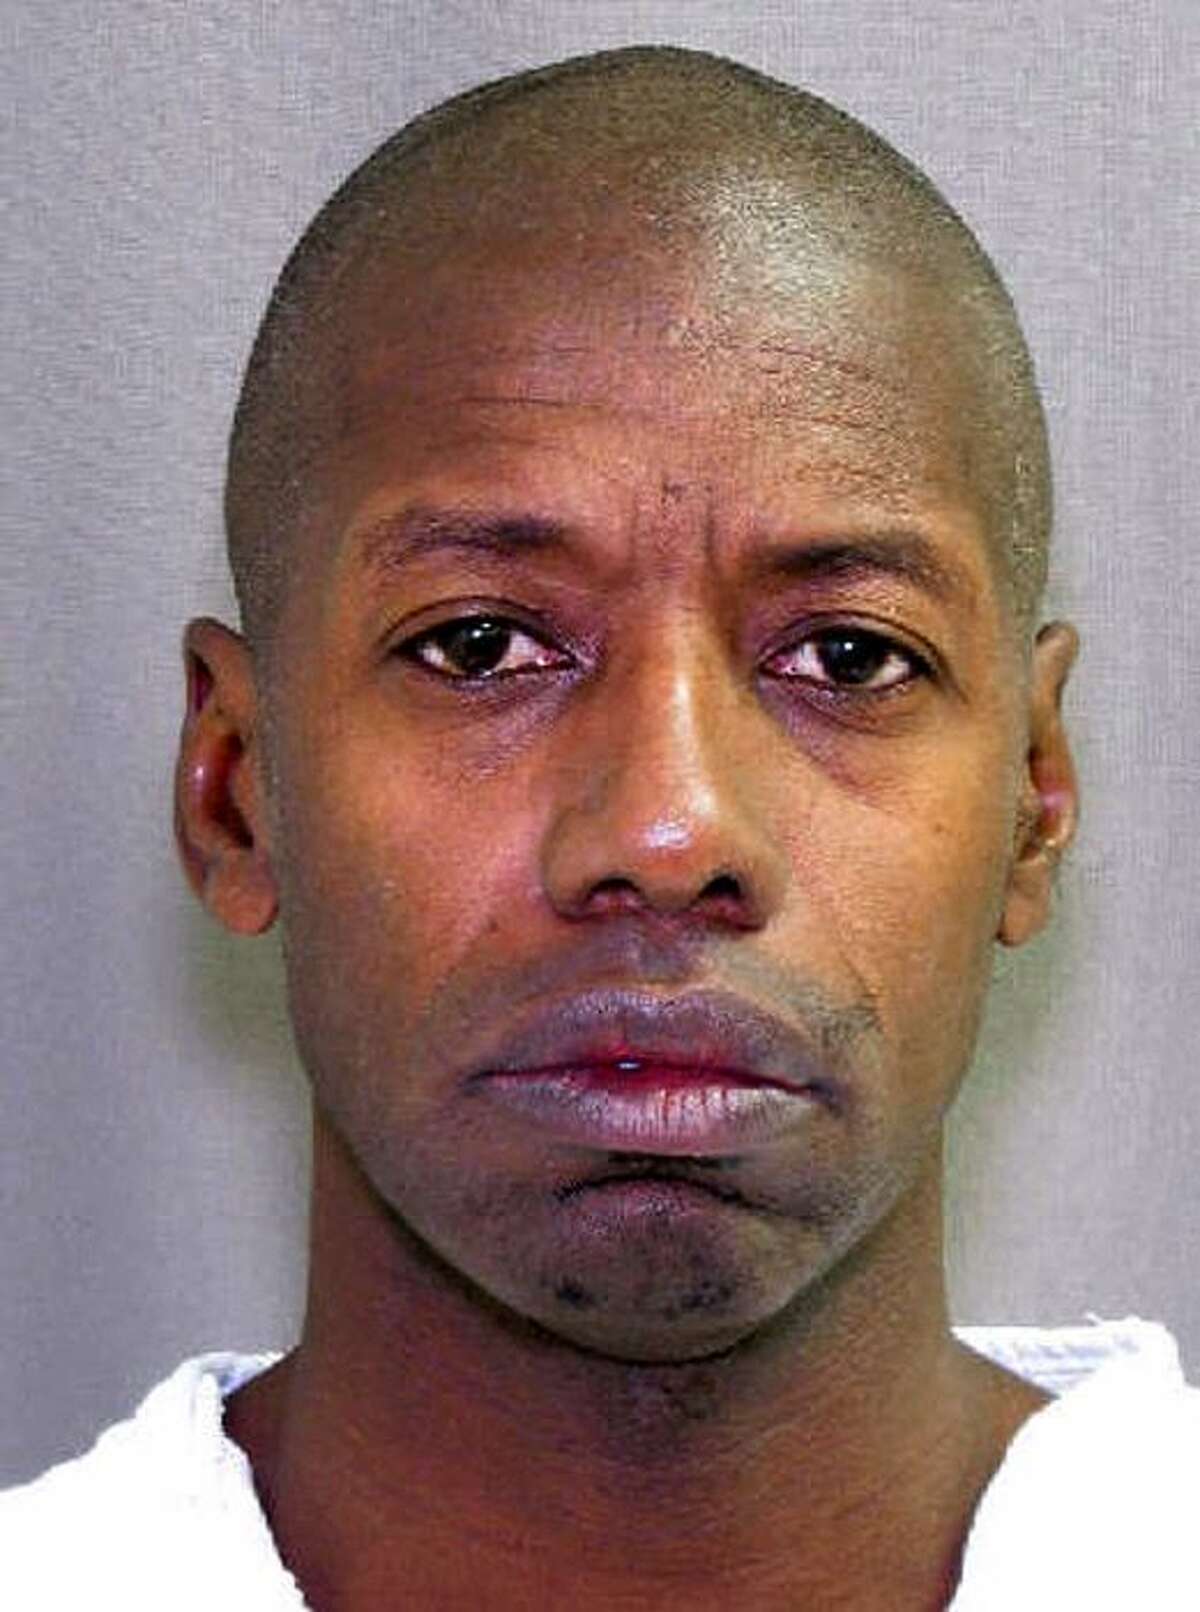 This undated handout photo provided by the Texas Department of Criminal Justice shows Darren Vann. Police say Vann, a suspect in the slayings of seven women whose bodies were found in northwestern Indiana over the weekend, is a former Texas resident who now lives in Gary. Hammond Police Chief John Doughty says Vann will be charged Monday in the slaying of a woman whose body was found Friday at a Motel 6 in Hammond. (AP Photo/Texas Department of Criminal Justice)